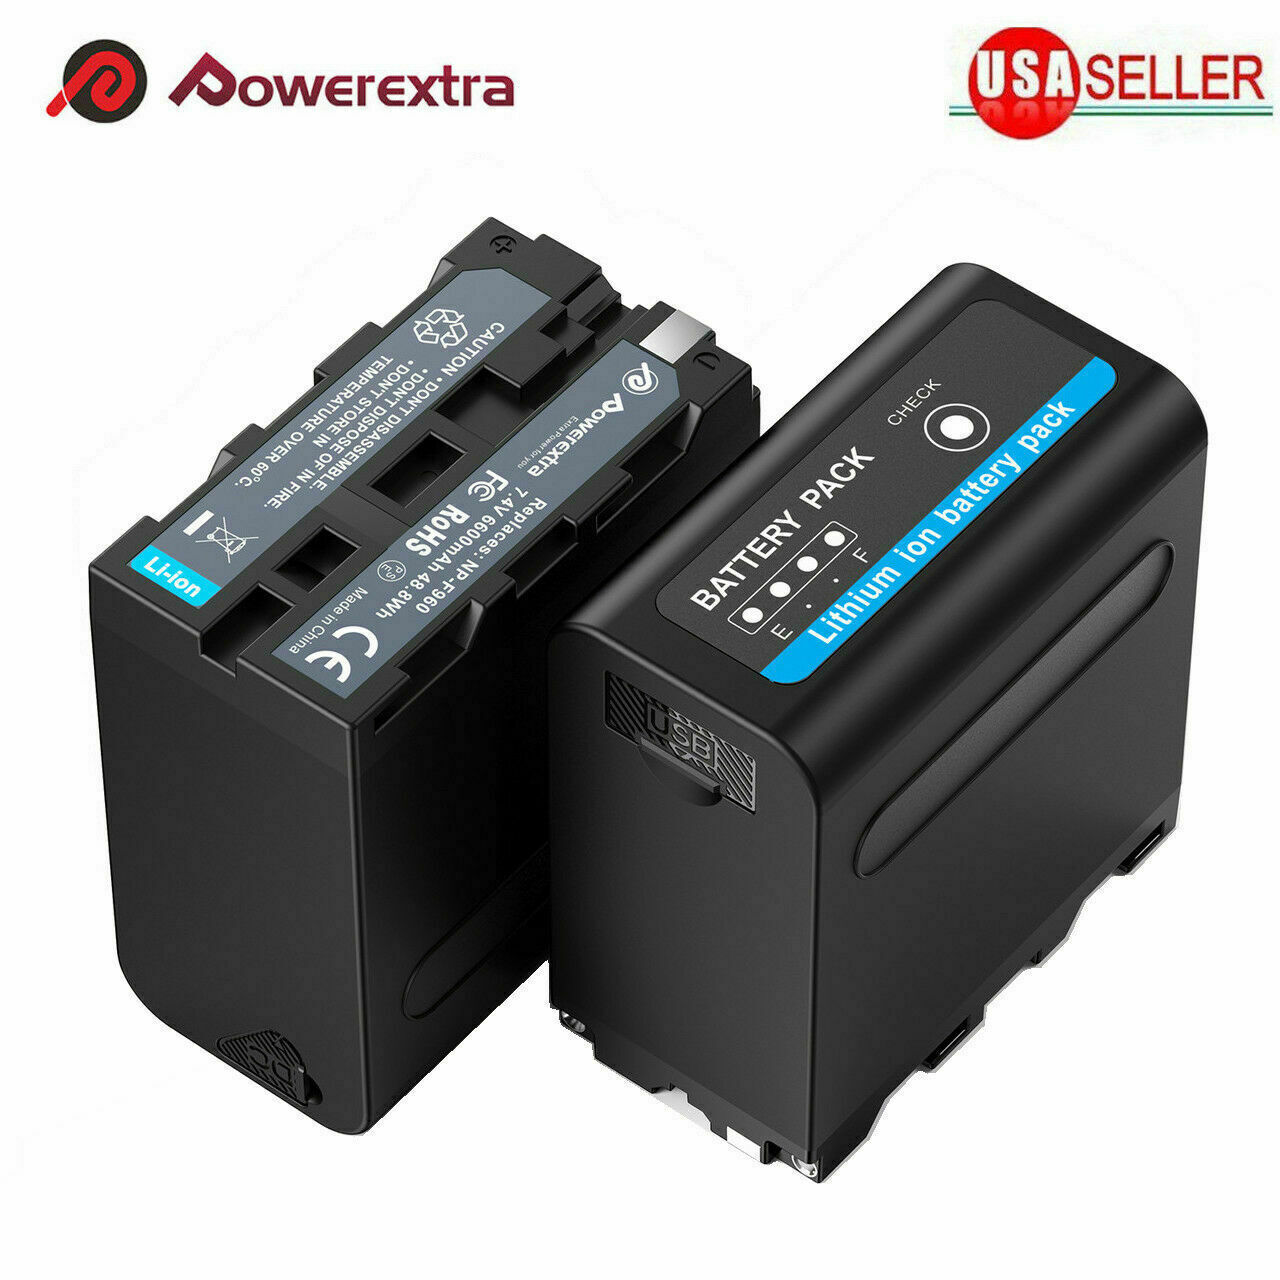 2 Pack 7.4V Li-ion Battery For Sony NP-F970 NP-F975 NP-F960 NP-F950 Camcorder Powerextra NP-F960